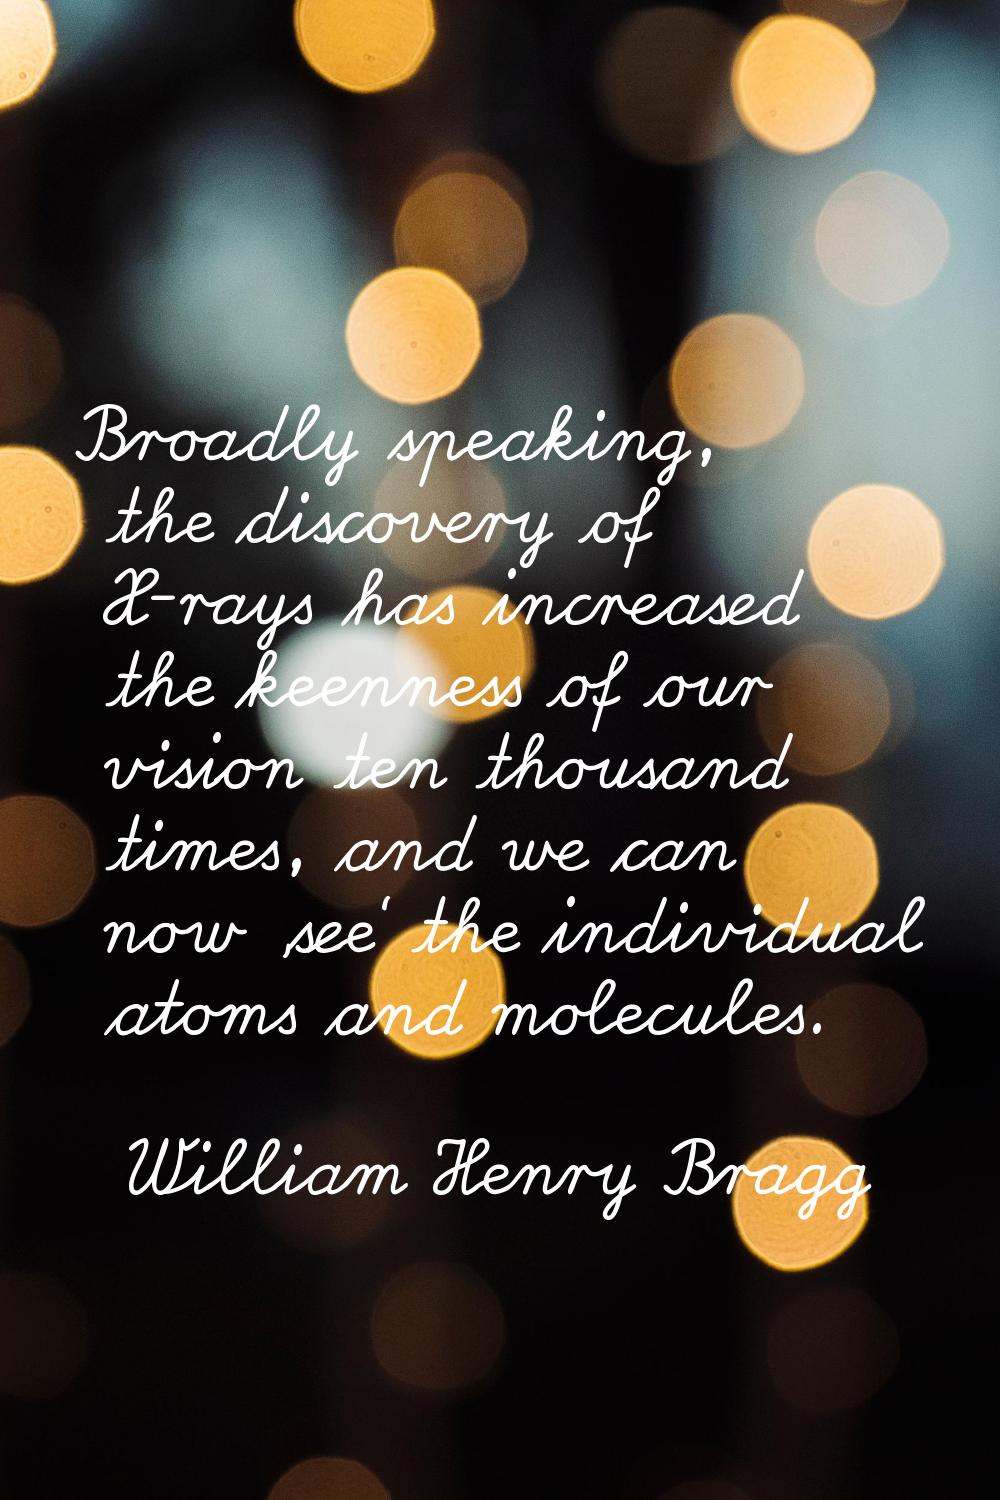 Broadly speaking, the discovery of X-rays has increased the keenness of our vision ten thousand tim